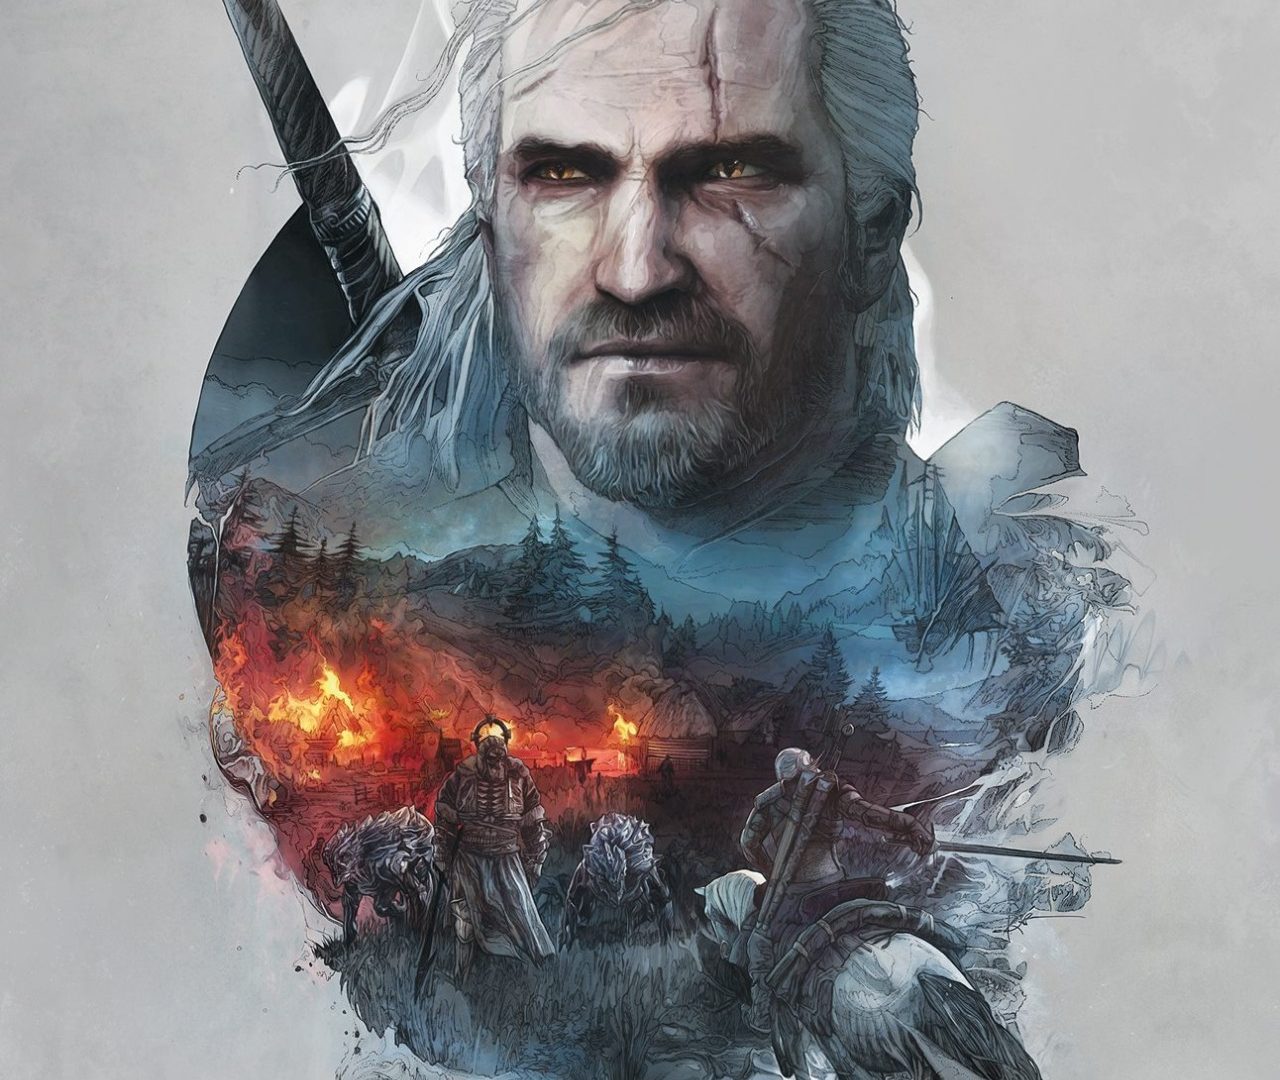 Buy The Witcher® 3: Wild Hunt from the Humble Store